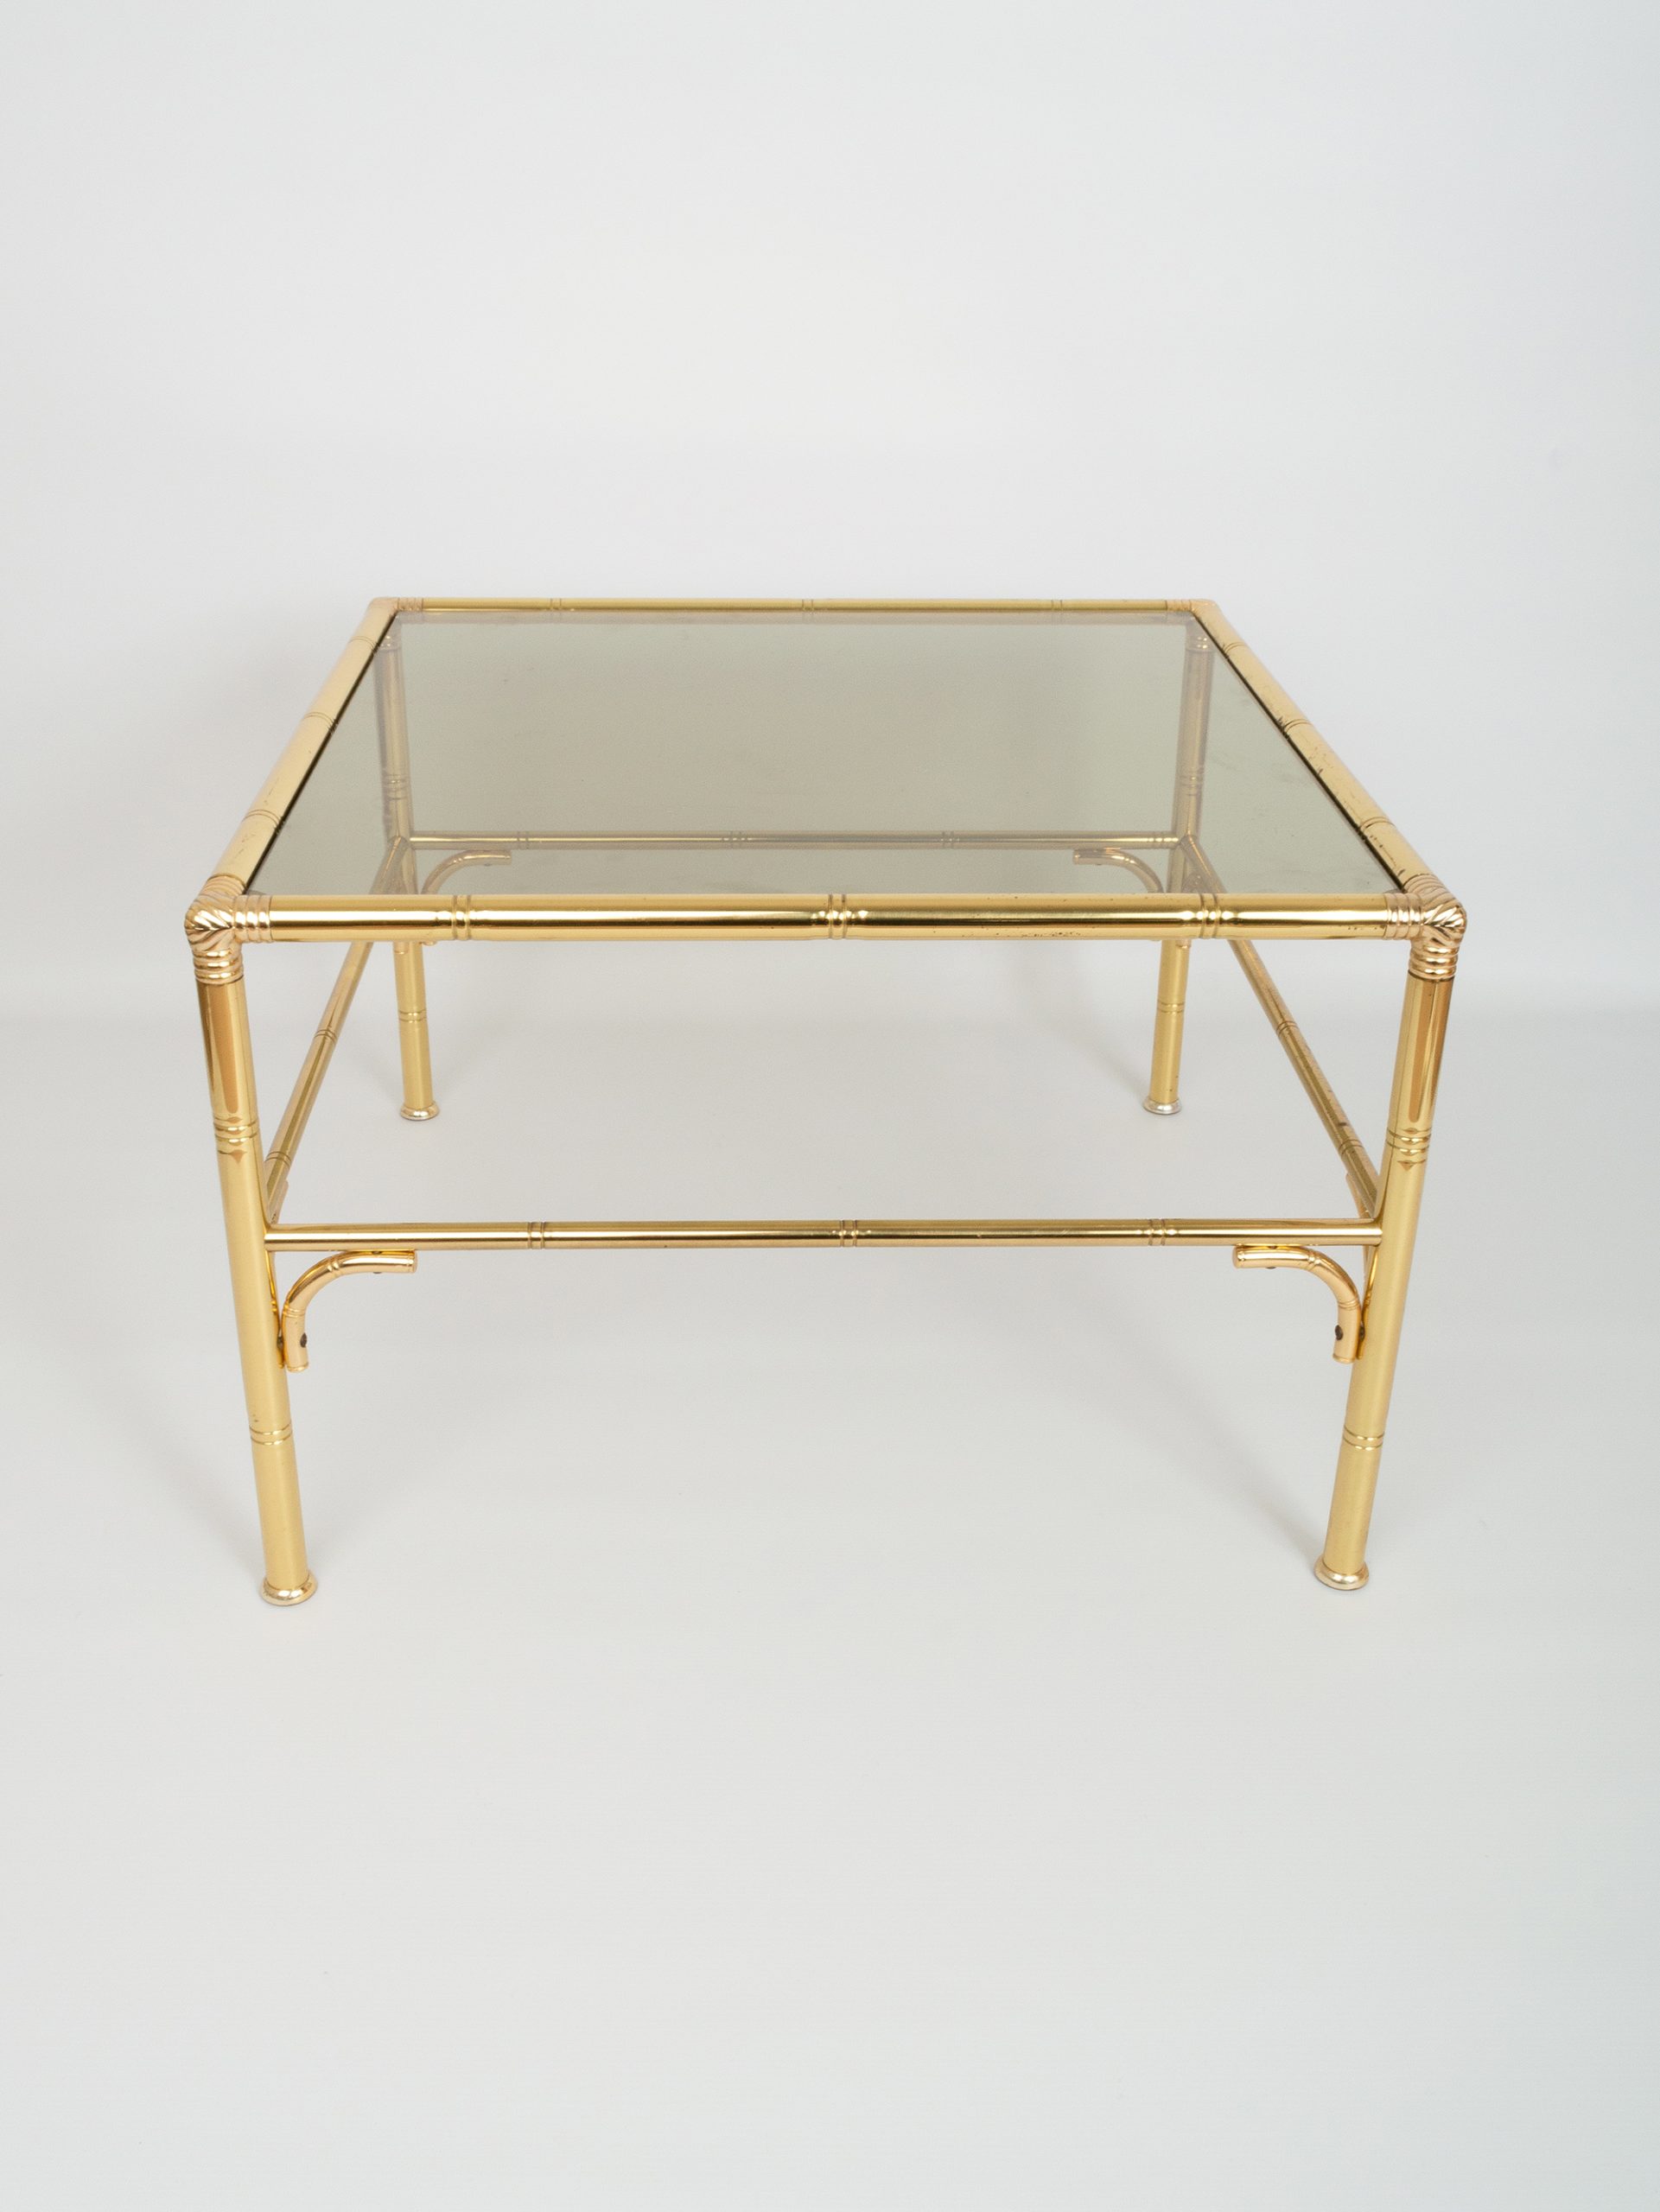 Lot - MID-CENTURY JANSEN STYLE FAUX BAMBOO BRASS COFFEE TABLE WITH